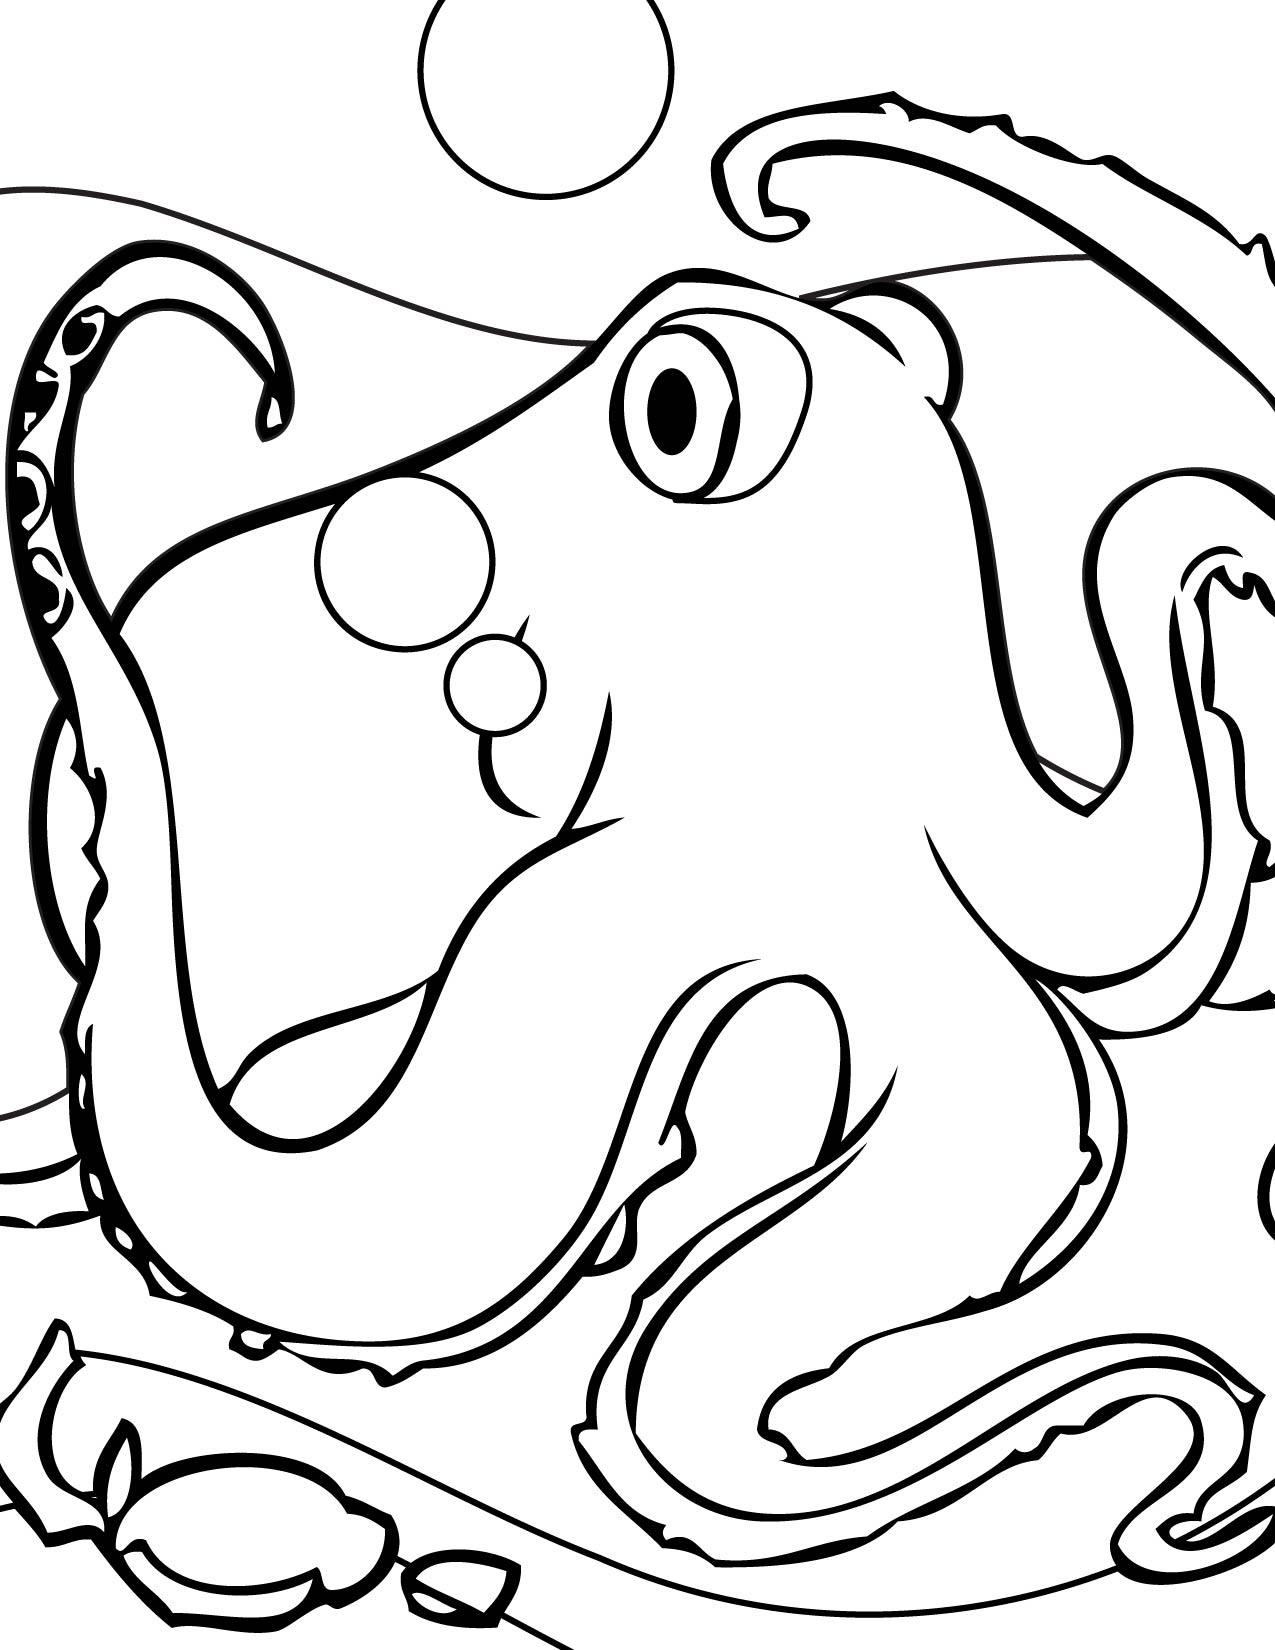 Giant Octopus Coloring Page - Handipoints